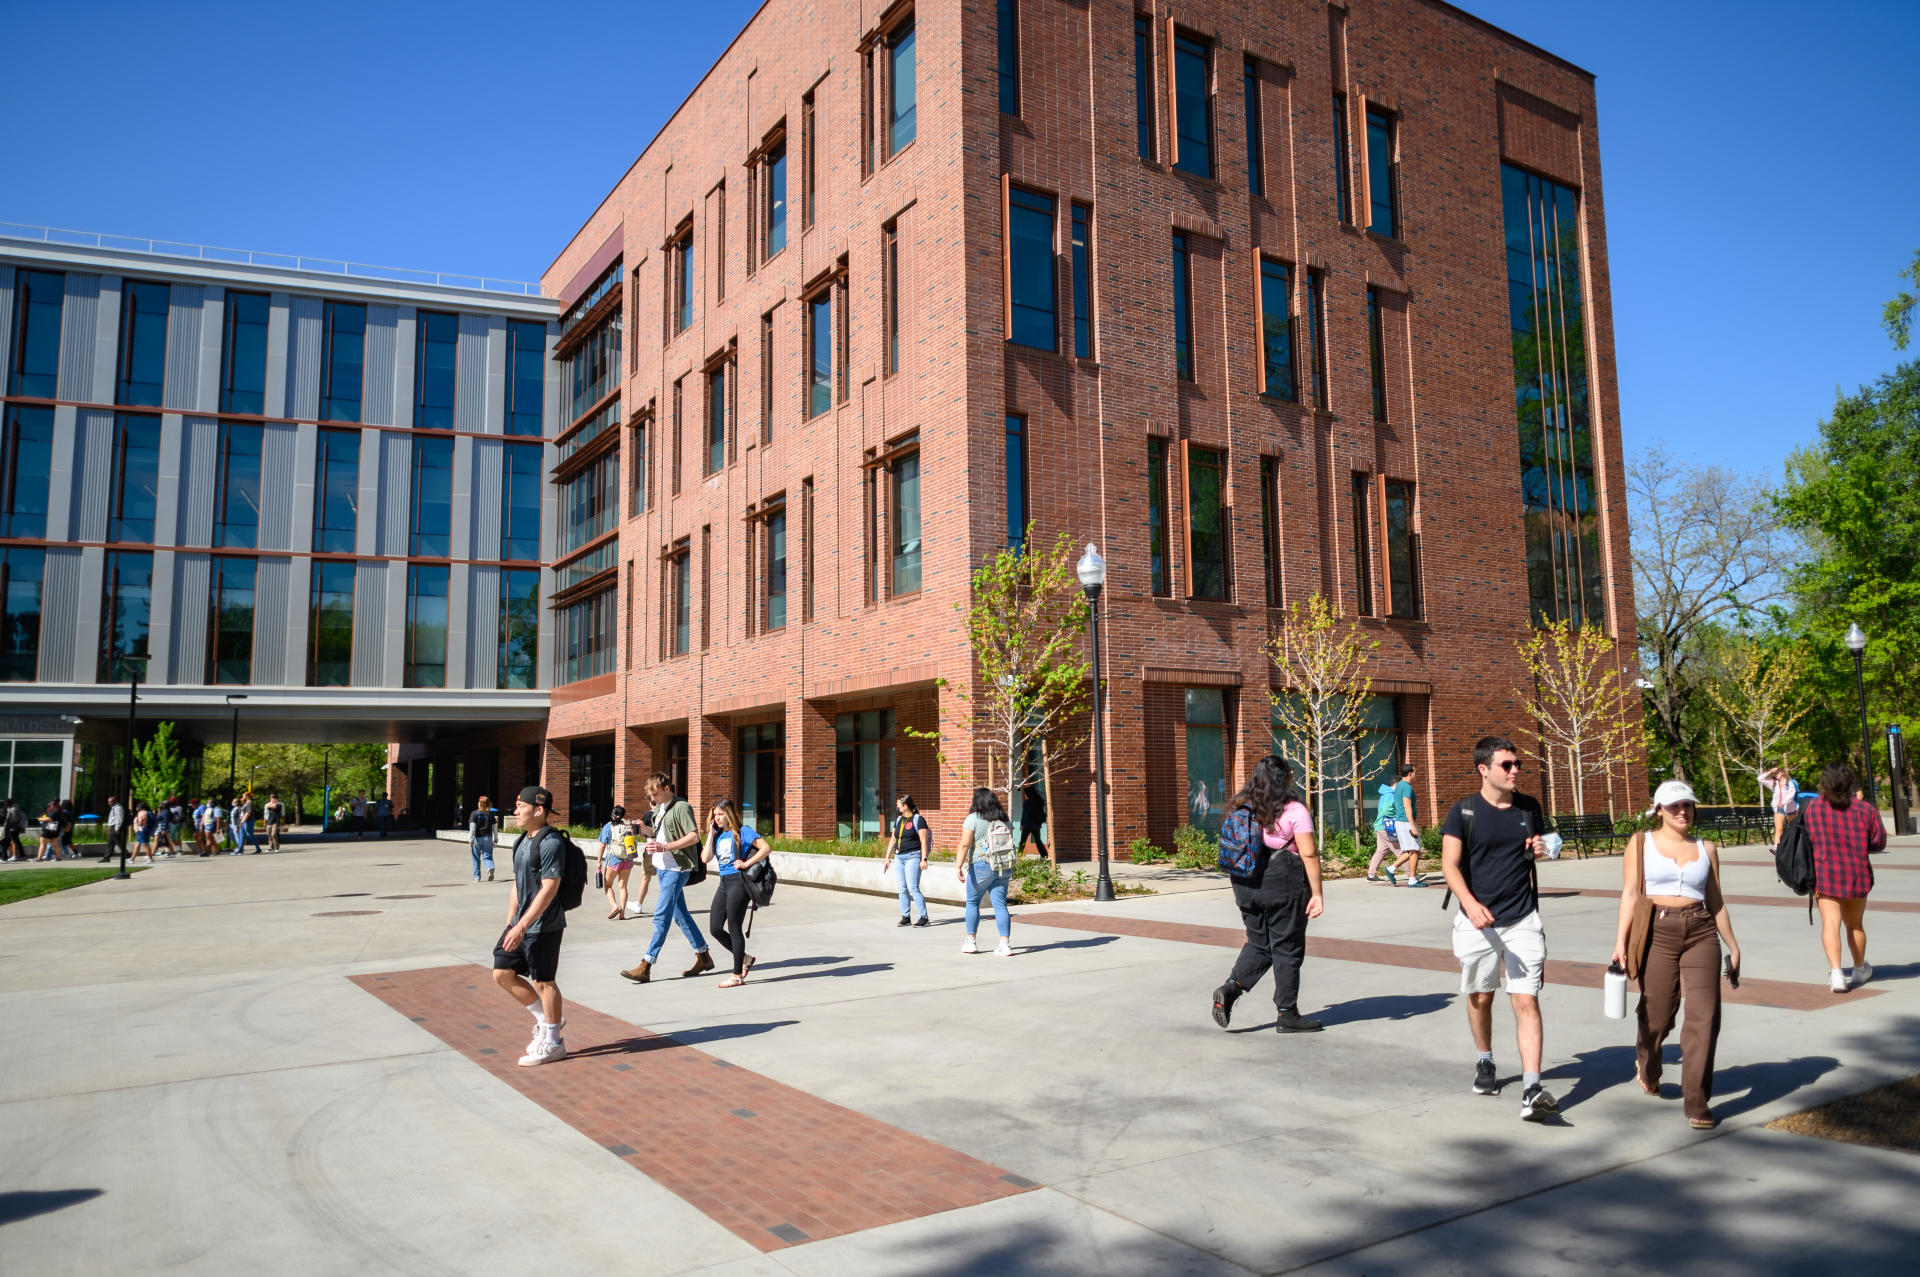 College students walk past an academic building on a cloudless sunny day.